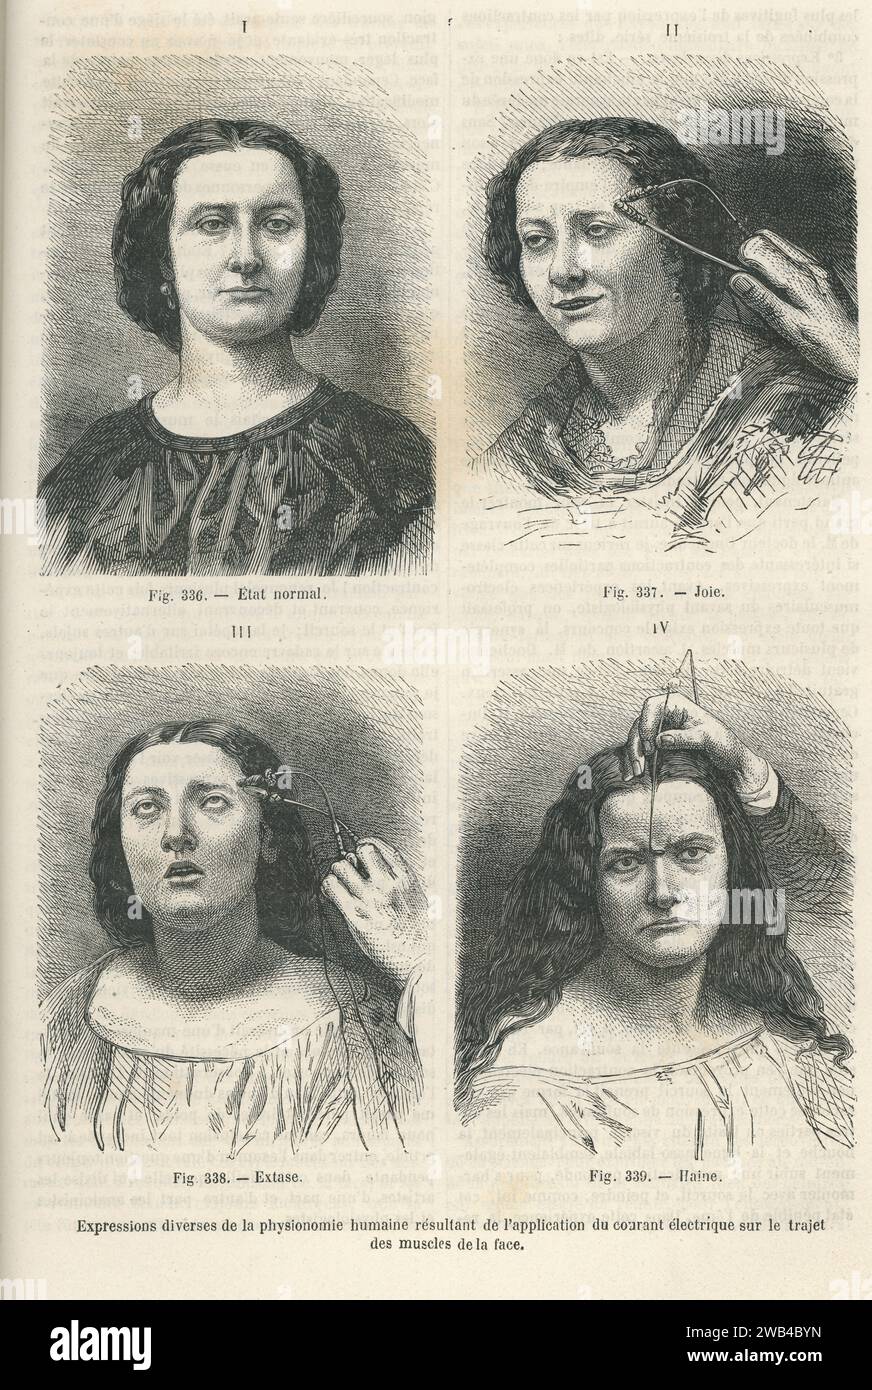 Various facial expressions obtained using the apparatus of the French physician Guillaume Duchenne de Boulogne (nicknamed Duchenne de Boulogne), which uses alternating current to stimulate muscle bundles with precision.  c.1830  Illustration from 'Les Merveilles de la science ou description populaire des inventions modernes' written by Louis Figuier and published in 1867 by Furne, Jouvet et Cie. Stock Photo